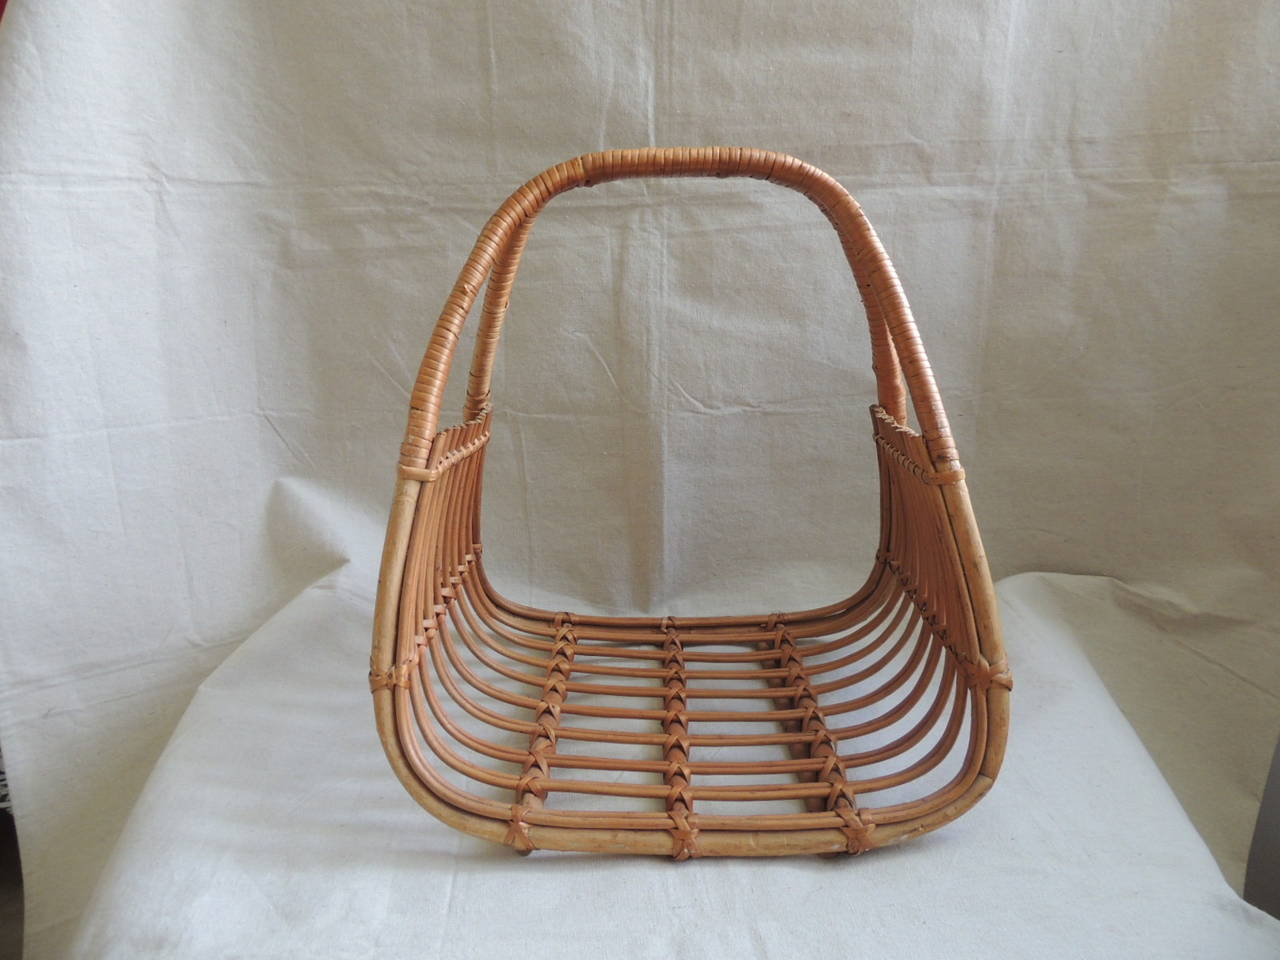 Vintage oval magazine holder/rack in bamboo and rattan weaving. Very strong. Nice patina.